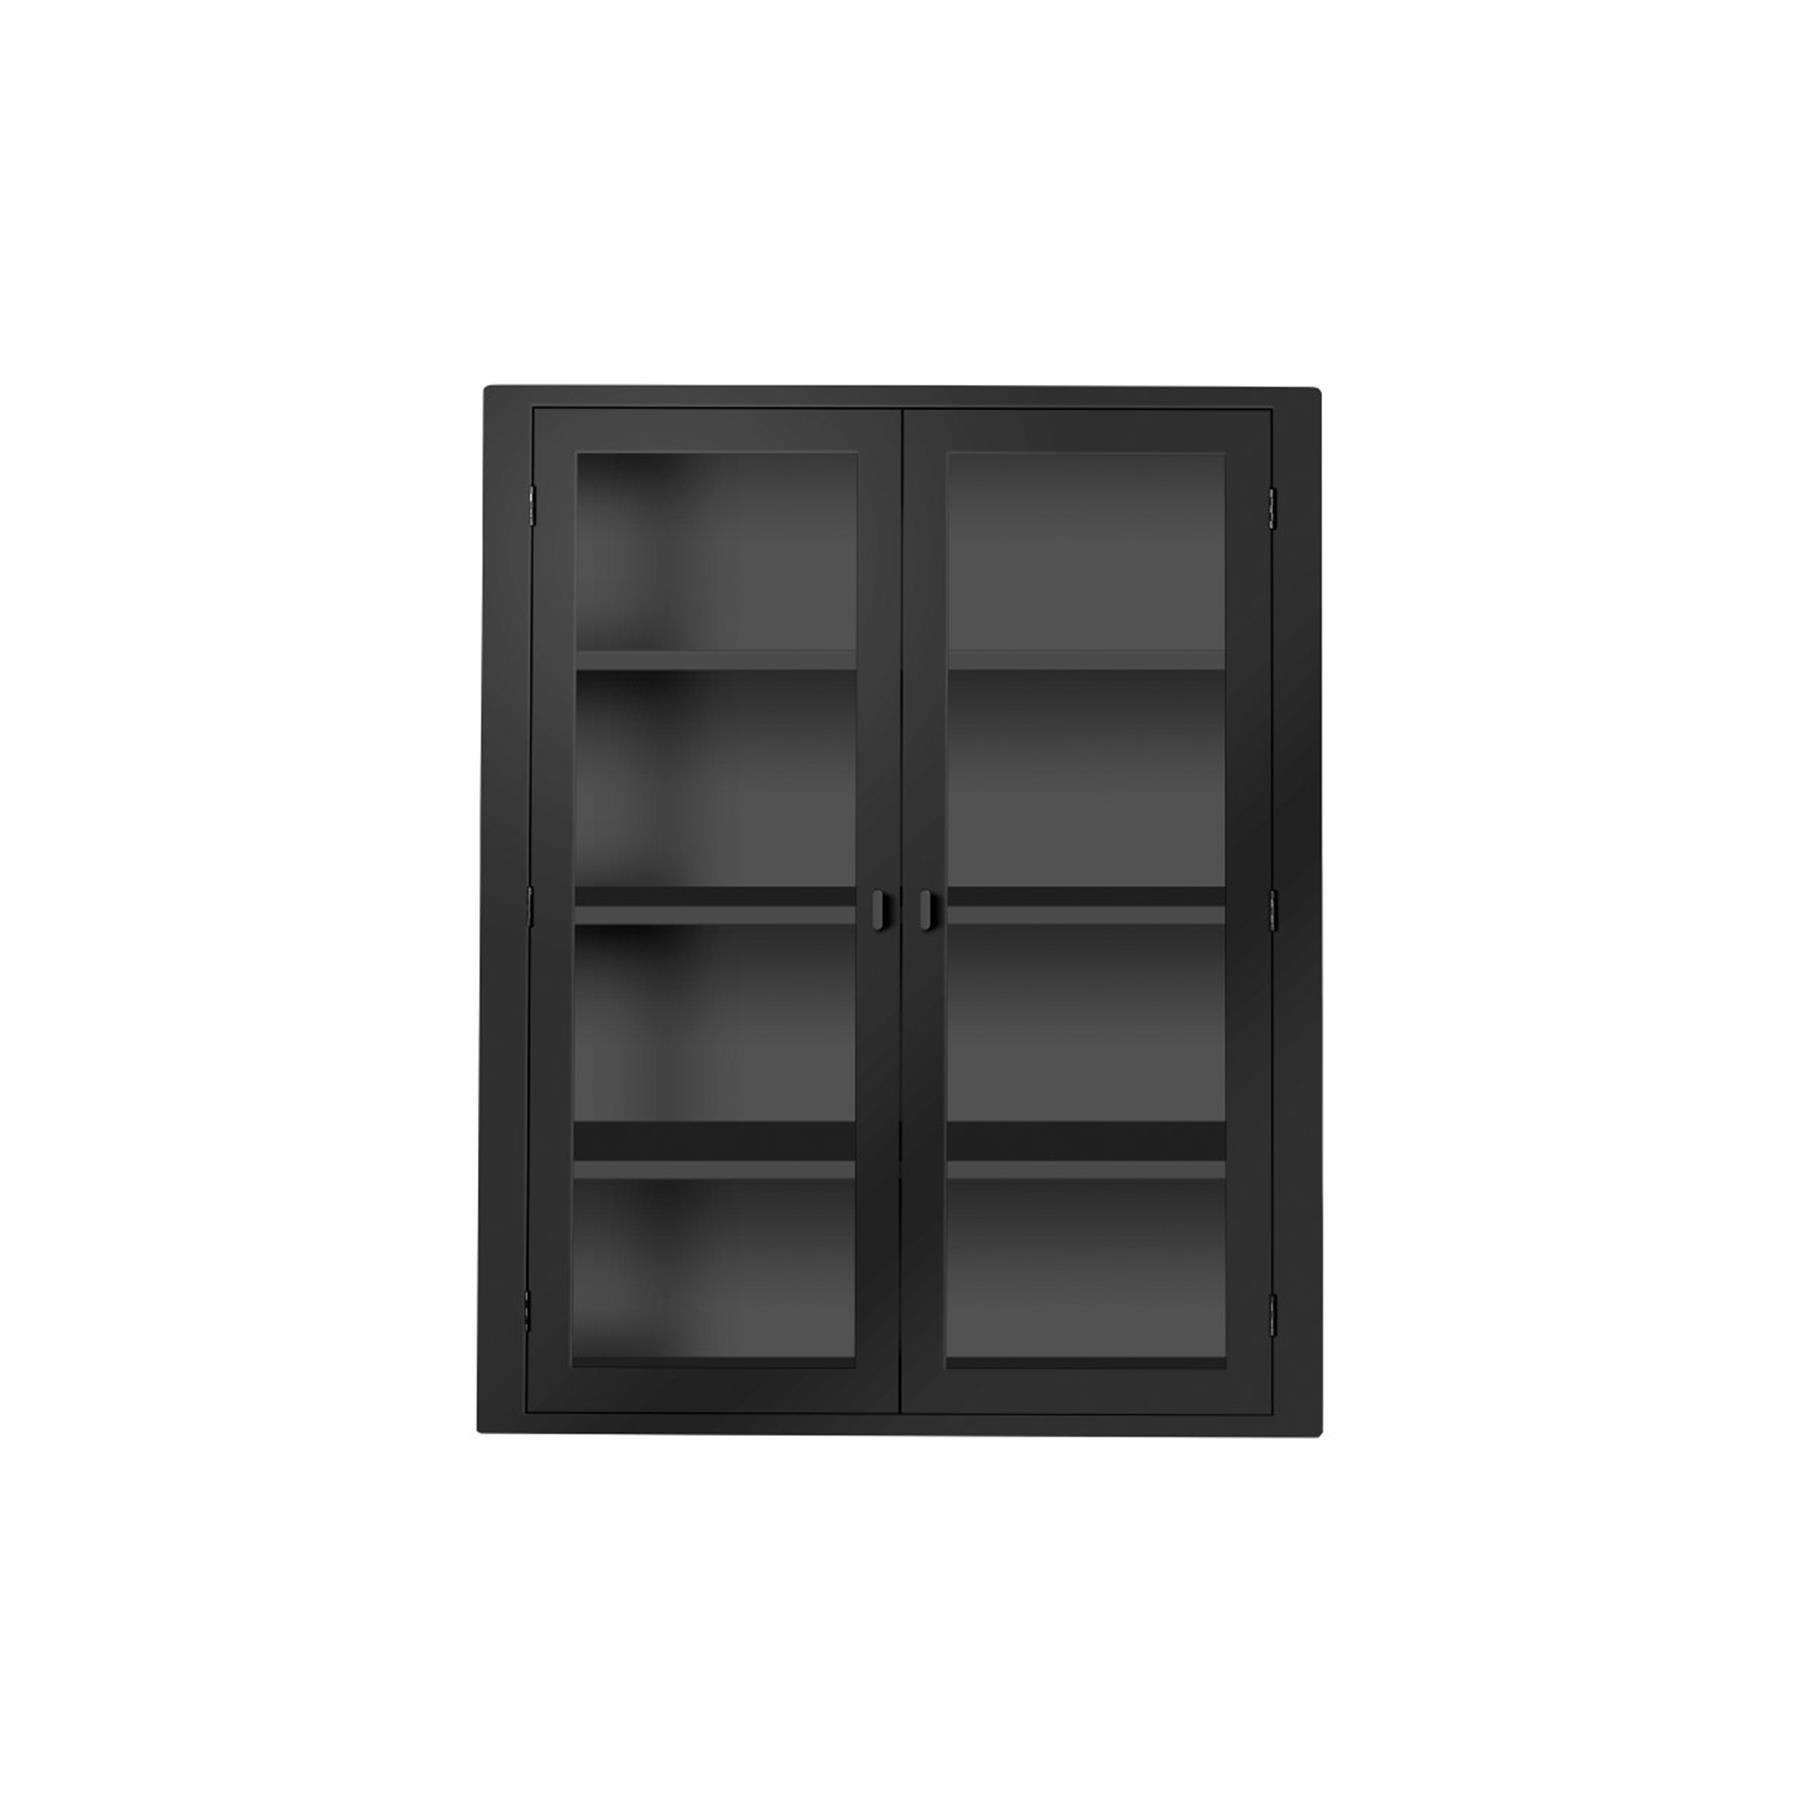 Fdb Mobler A90 Boderne Wall Mounted Display Cabinet Black Beech Designer Furniture From Holloways Of Ludlow